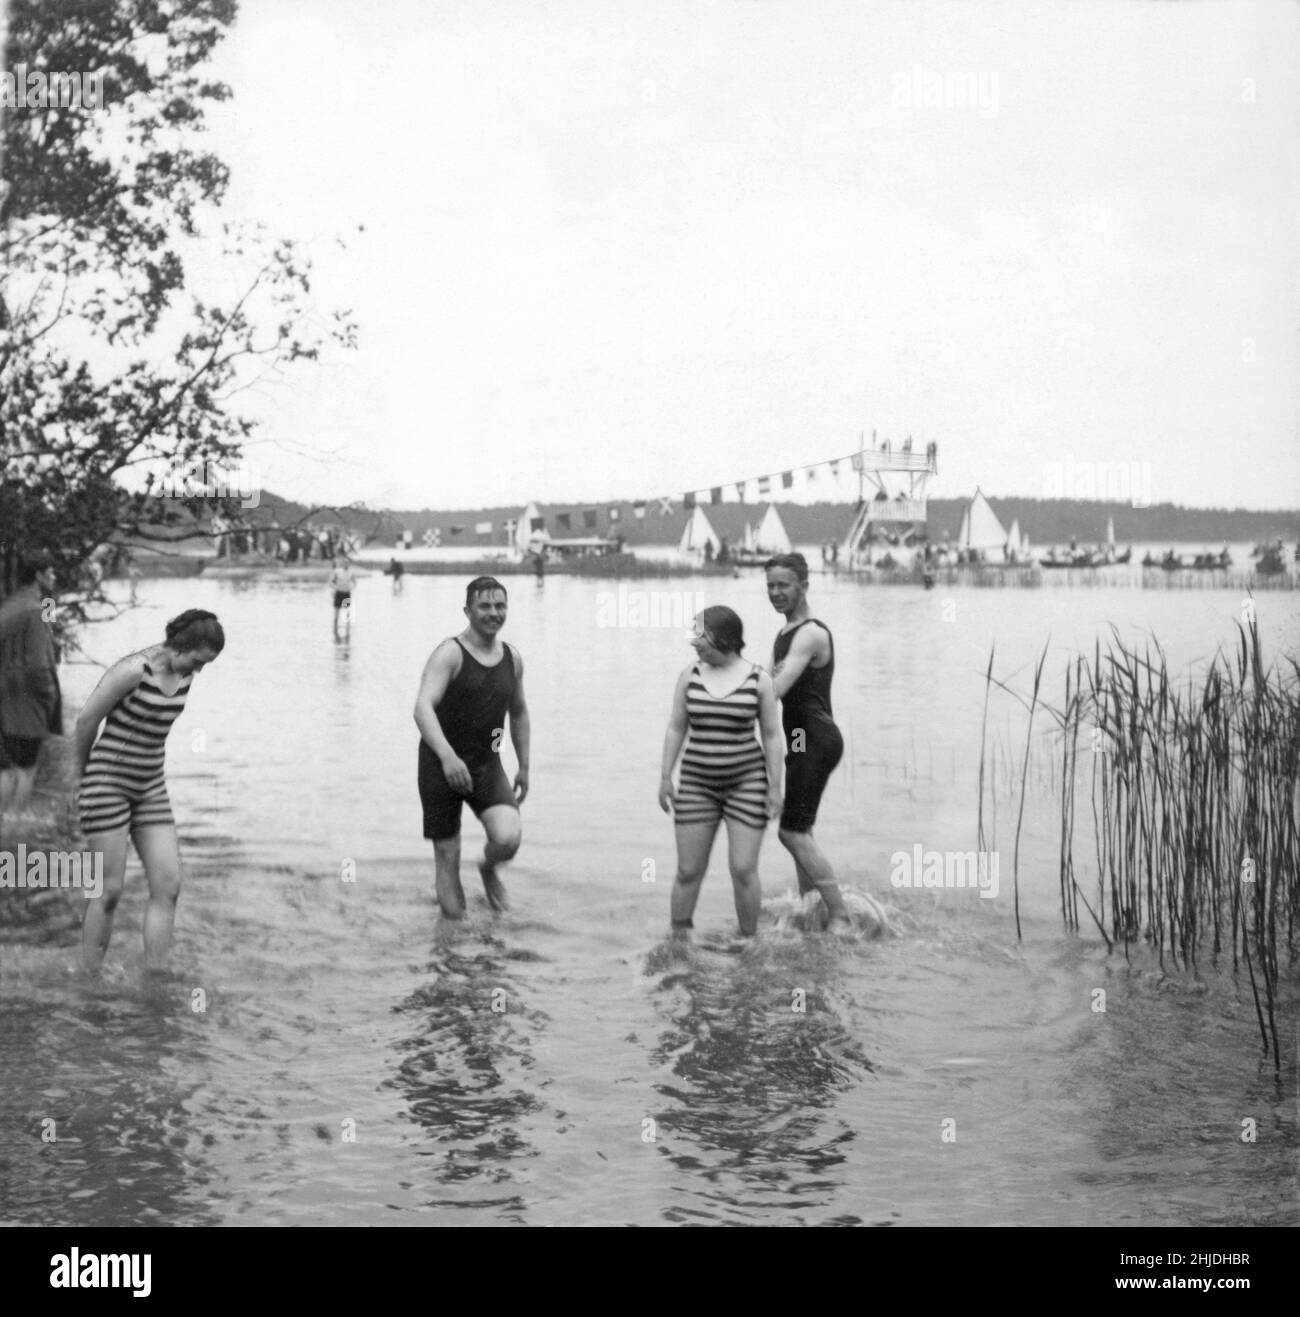 First bath where men and women are allowed to take a bath together june 15 1913. Close to Hässelby in Stockholm. Many thought this was immoral and upsetting despite the bathing clothes both women and men wore are covering most of their bodies. One reporter wrote after the grand opening 'may god preserve us from any more places of the sort'. Stock Photo